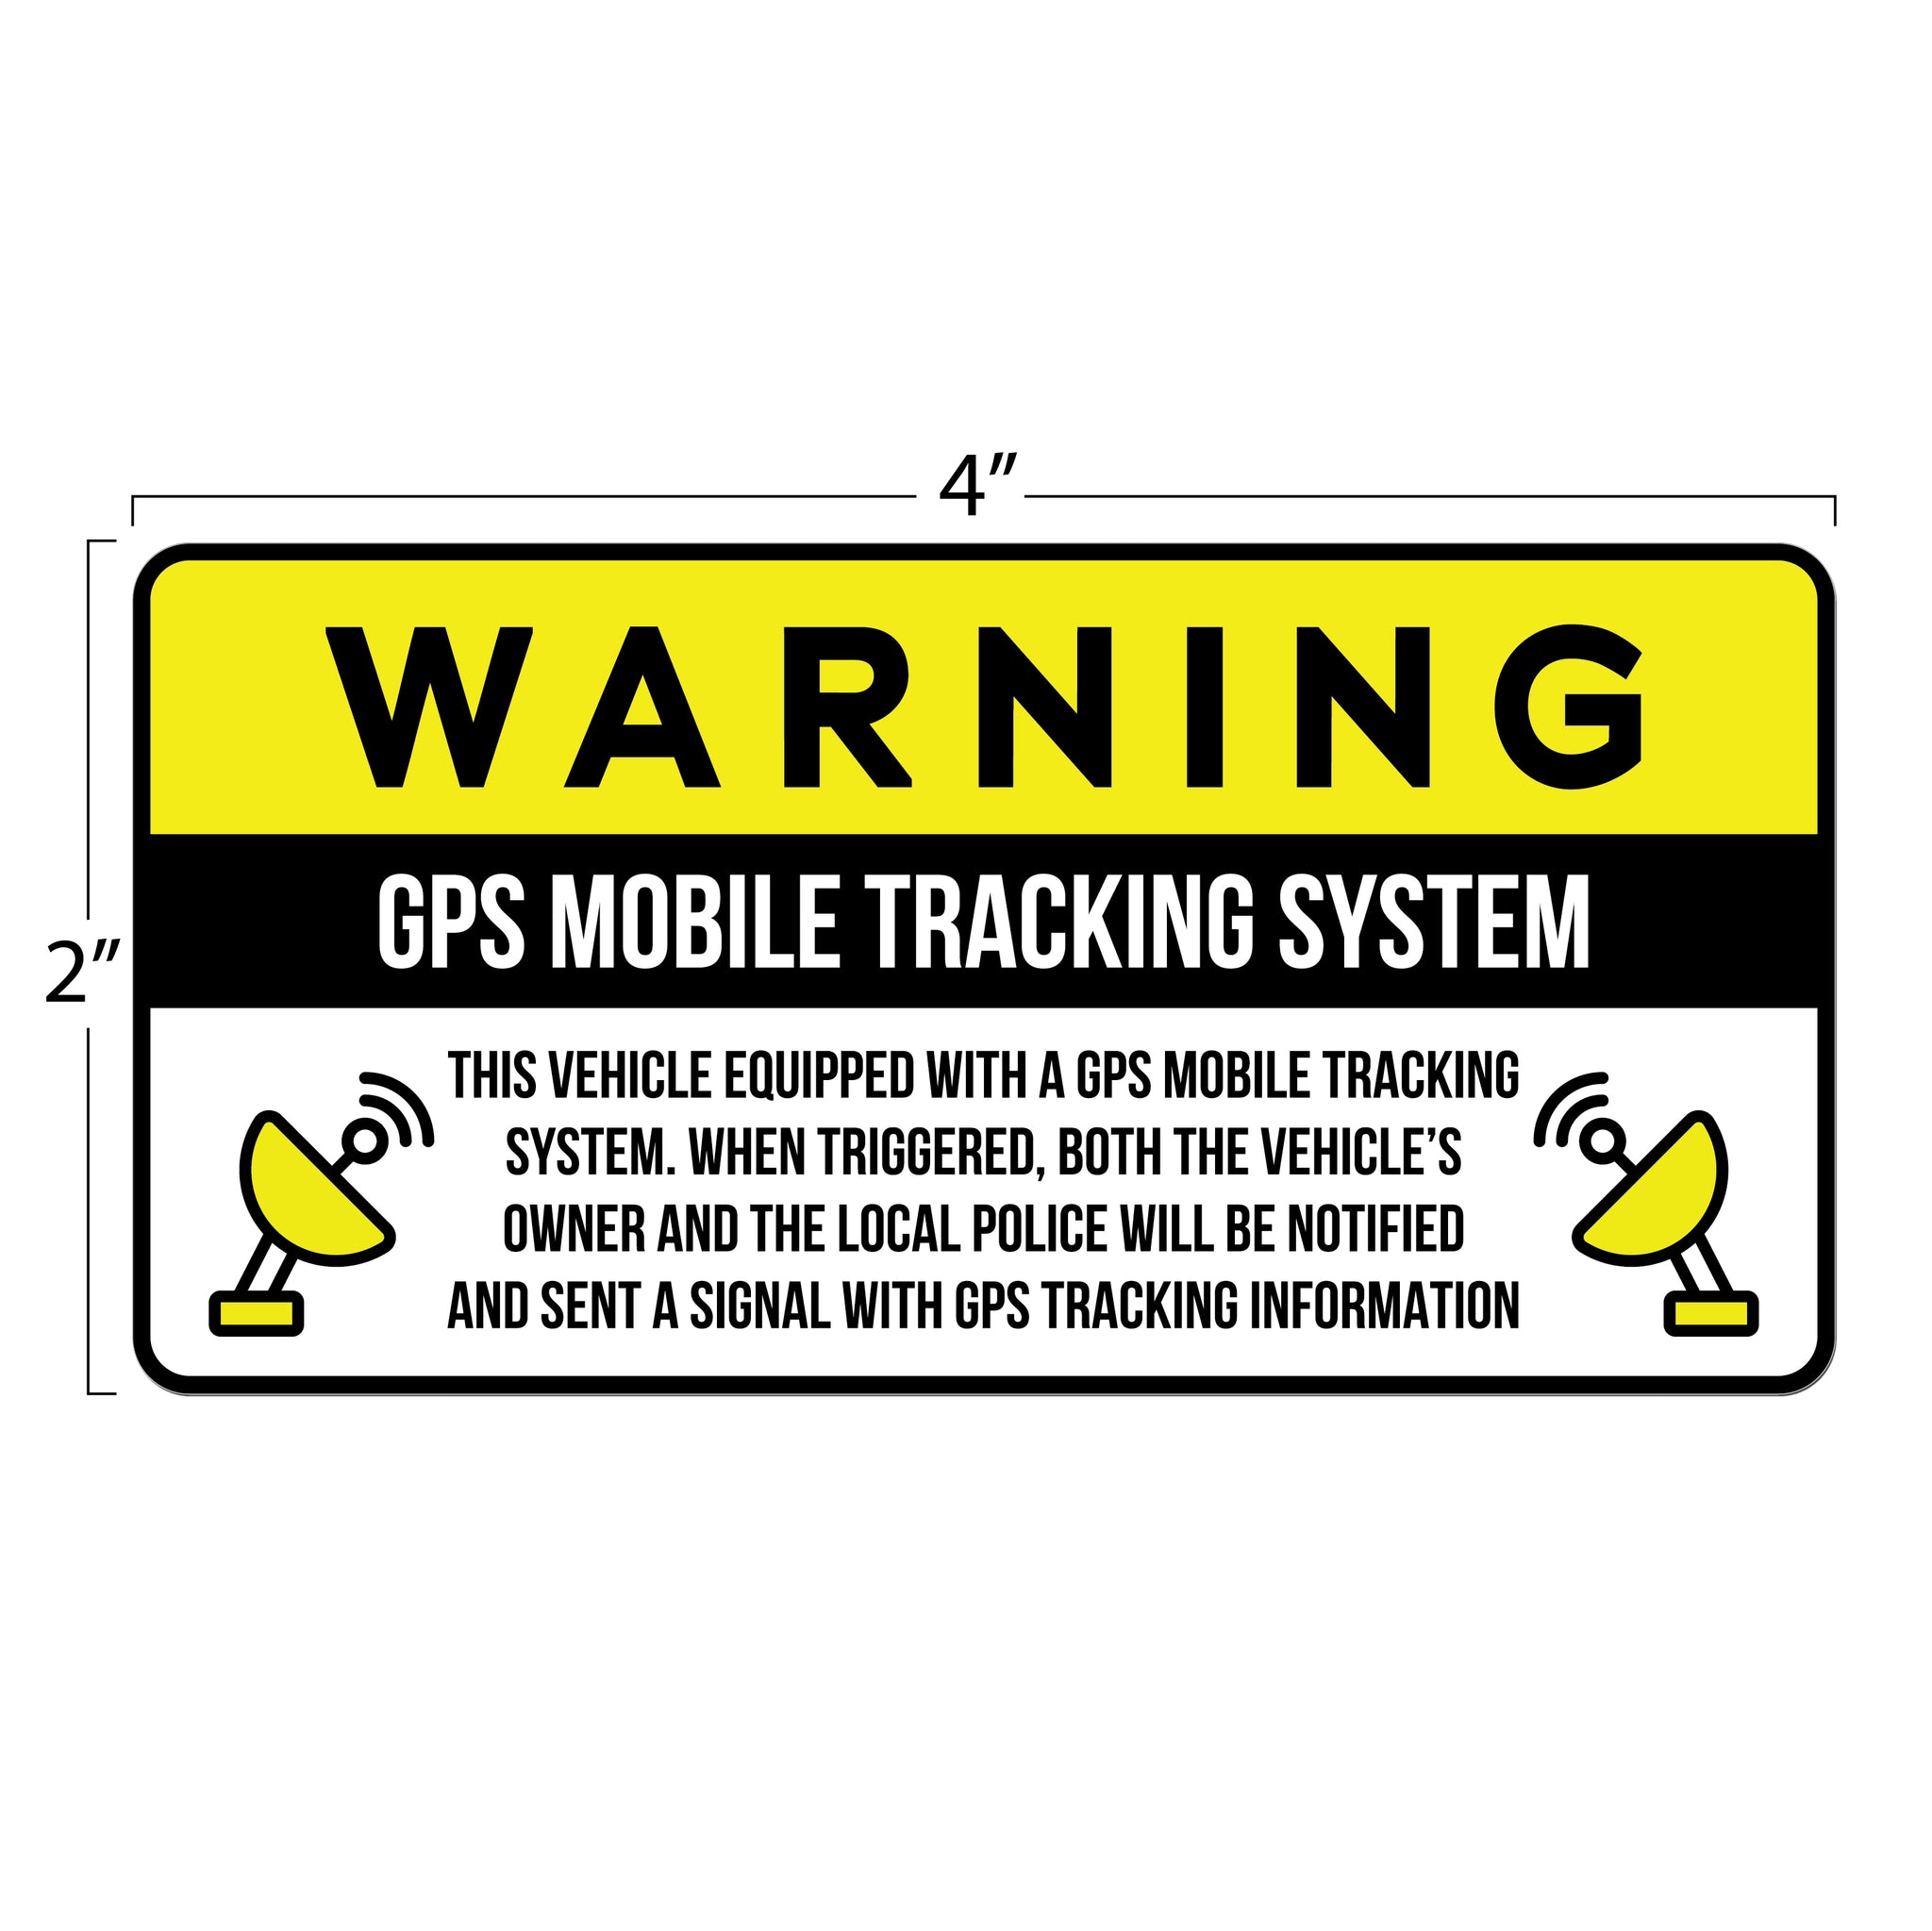 Anti-Theft Car Vehicle Stickers with GPS Tracking Warning (Pack of